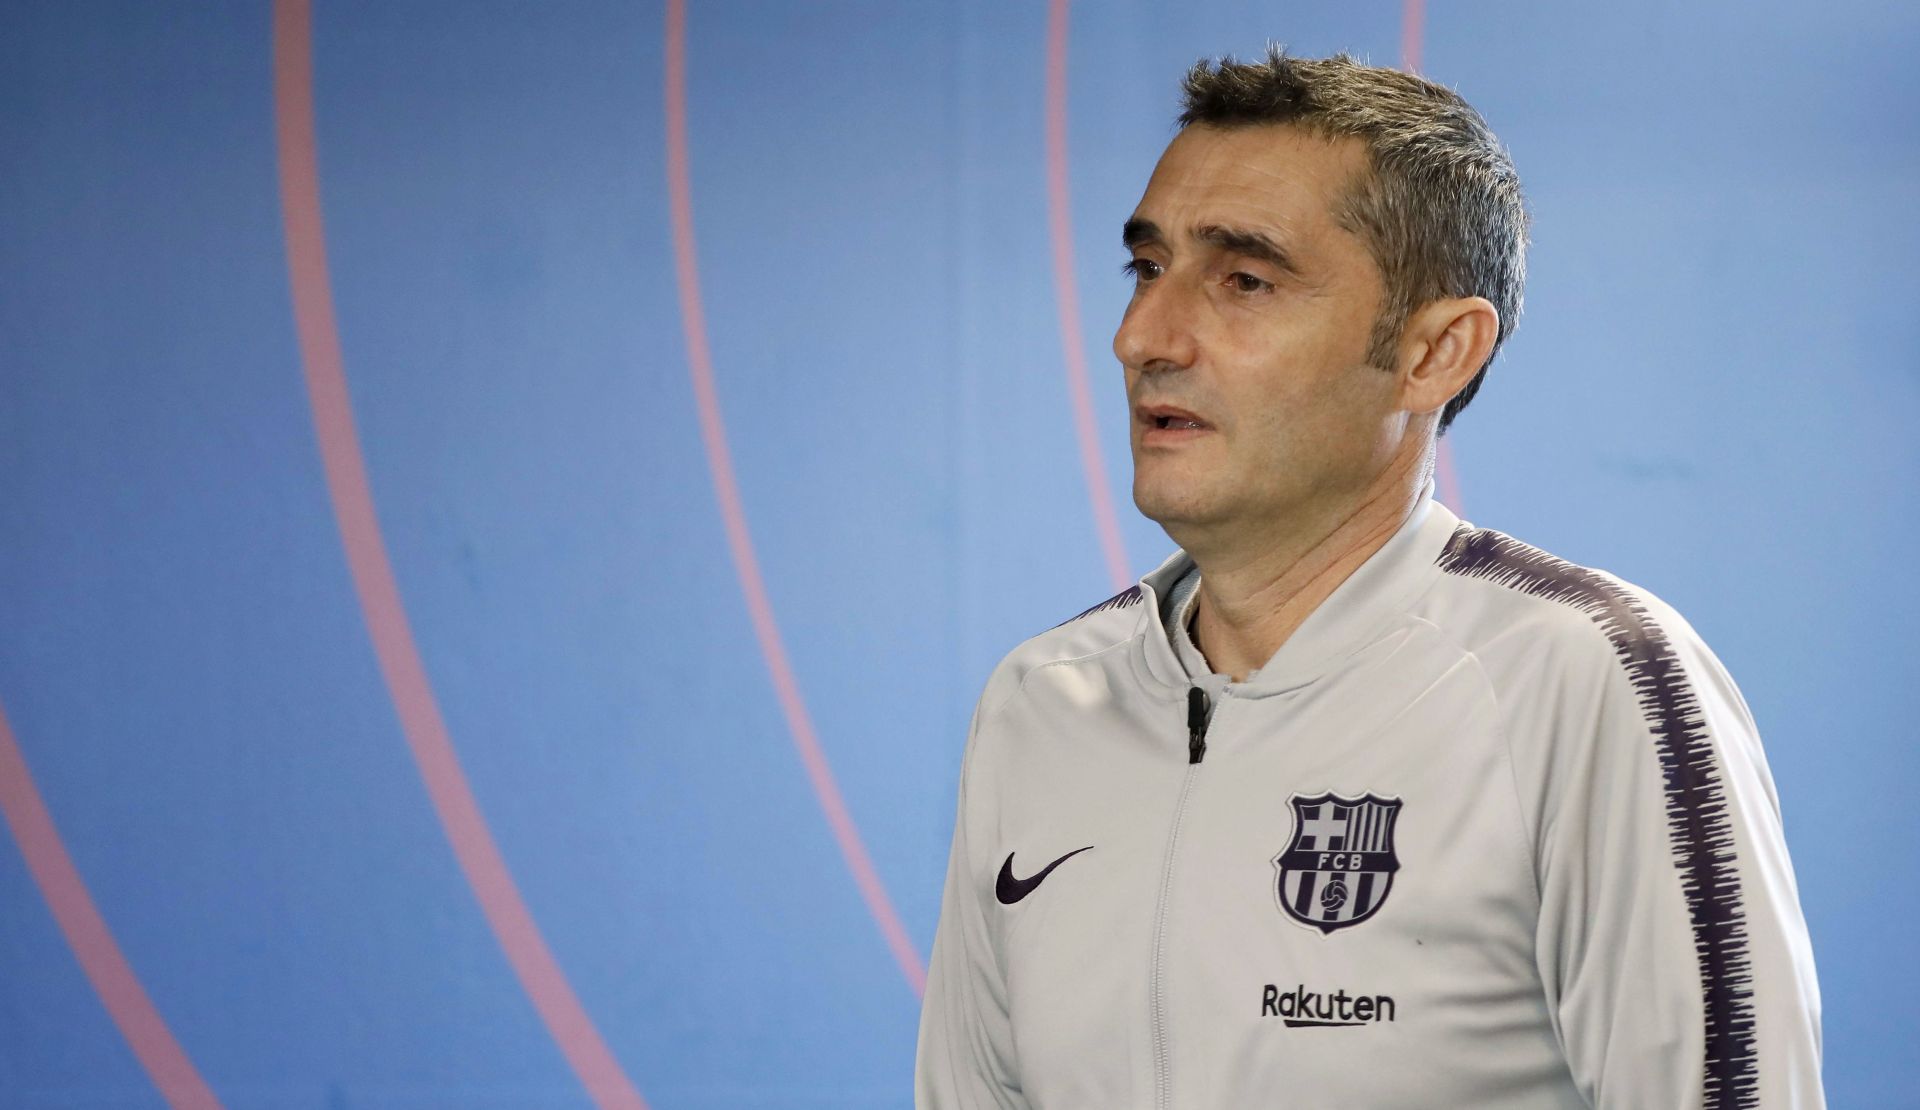 epa07321488 Barcelona's FC head coach, Ernesto Valverde, addresses a press conference after the team's training session at Joan Gamper sports city in Barcelona, Spain, 26 January 2019. Barcelona FC faces Girona, 27 January 2019, in a Primera Division Liga match.  EPA/Andreu Dalmau